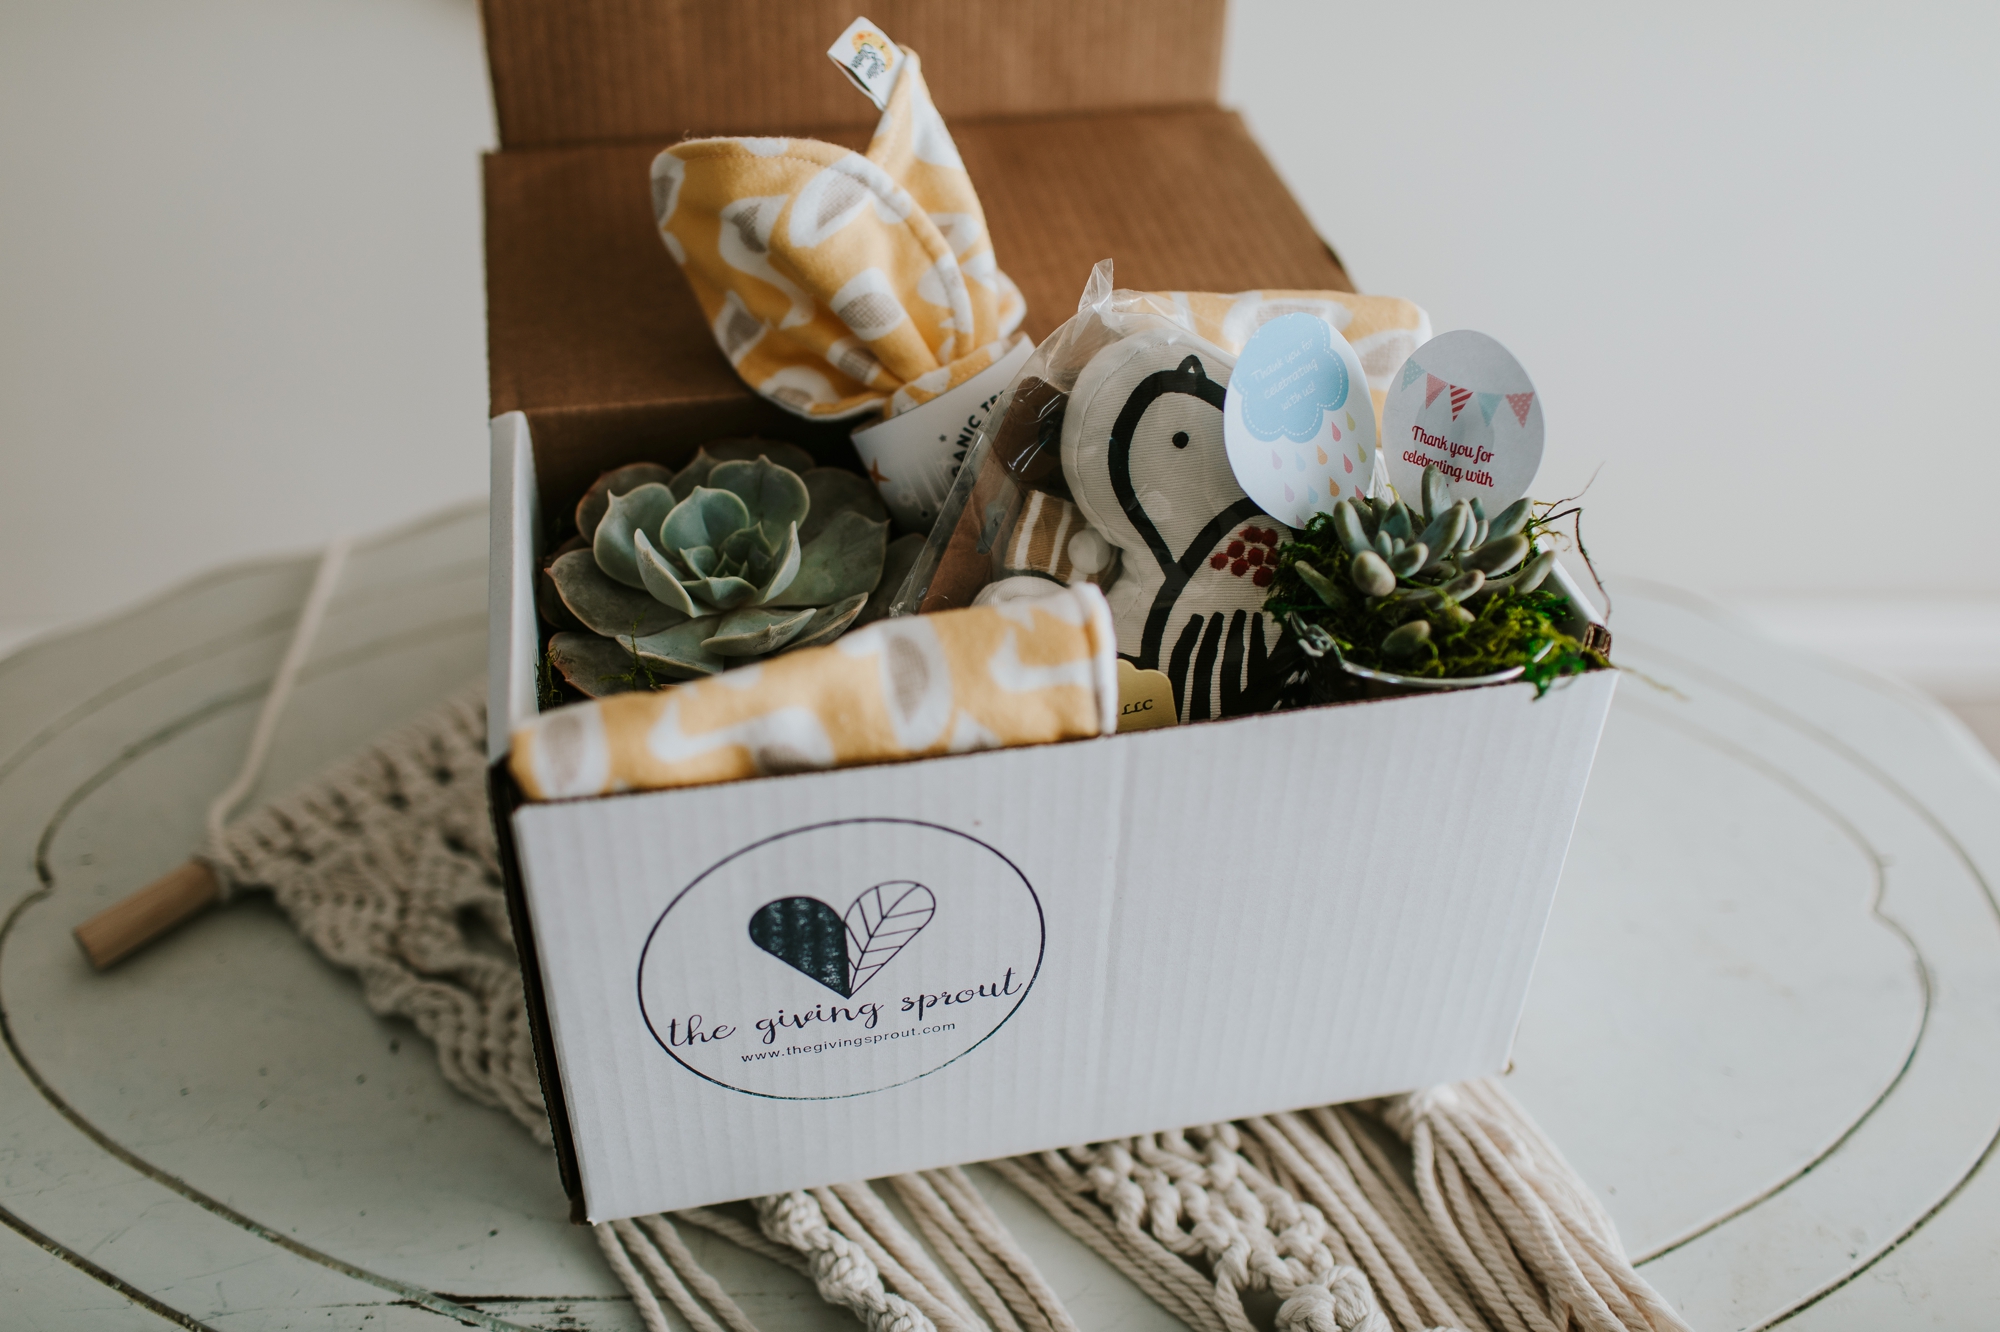 Giving Sprout gift basket newborn maternity photographer 63090